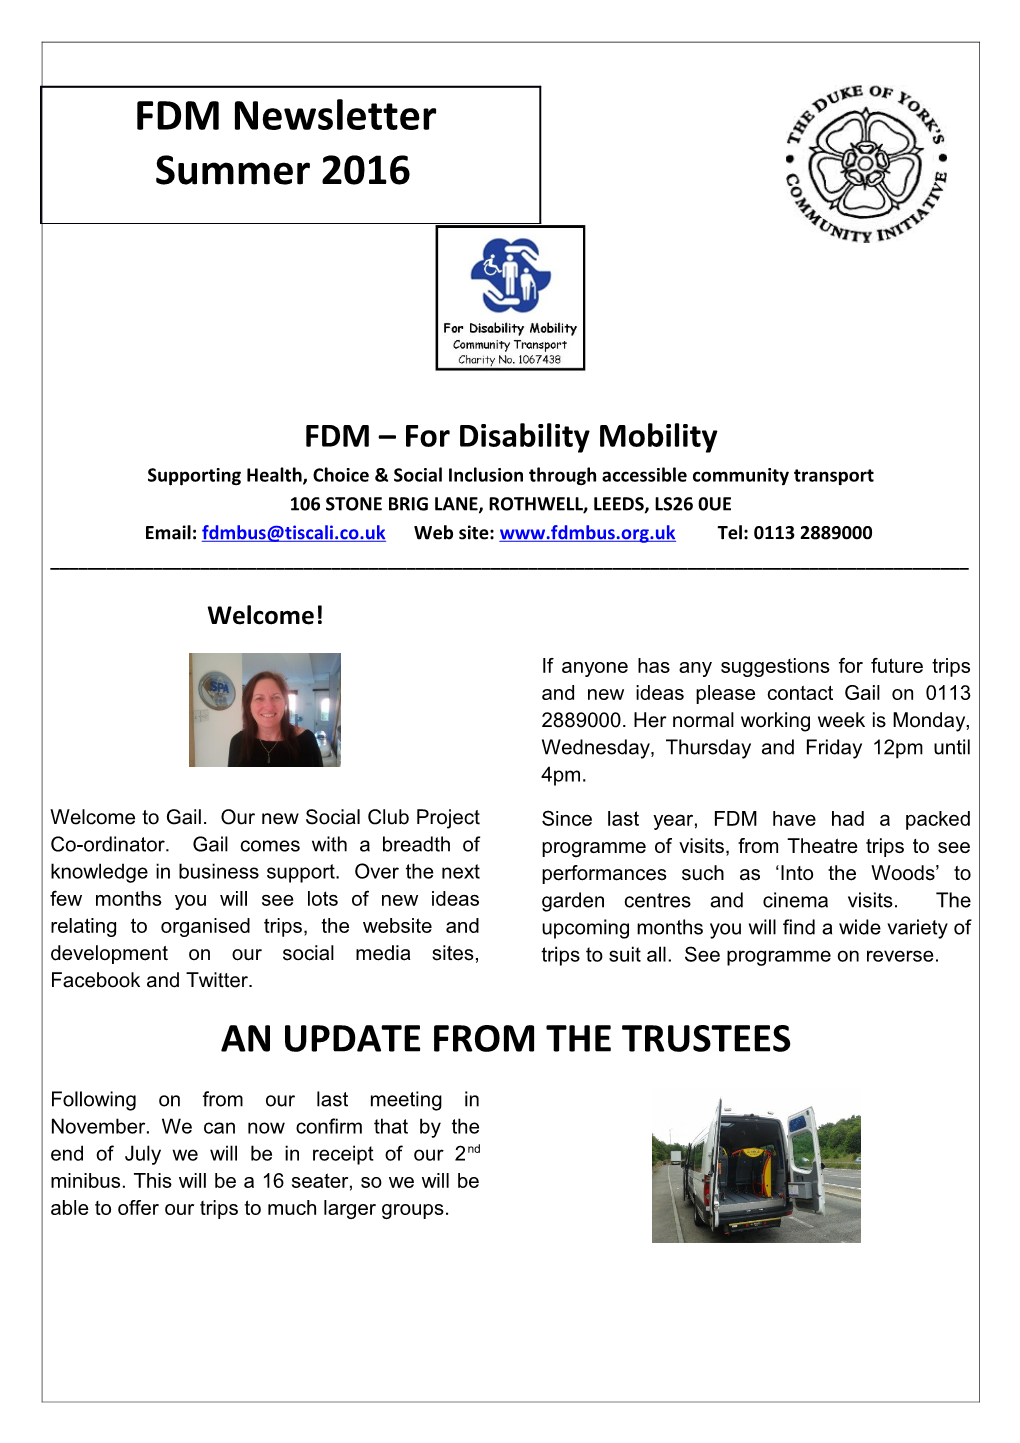 FDM for Disability Mobility